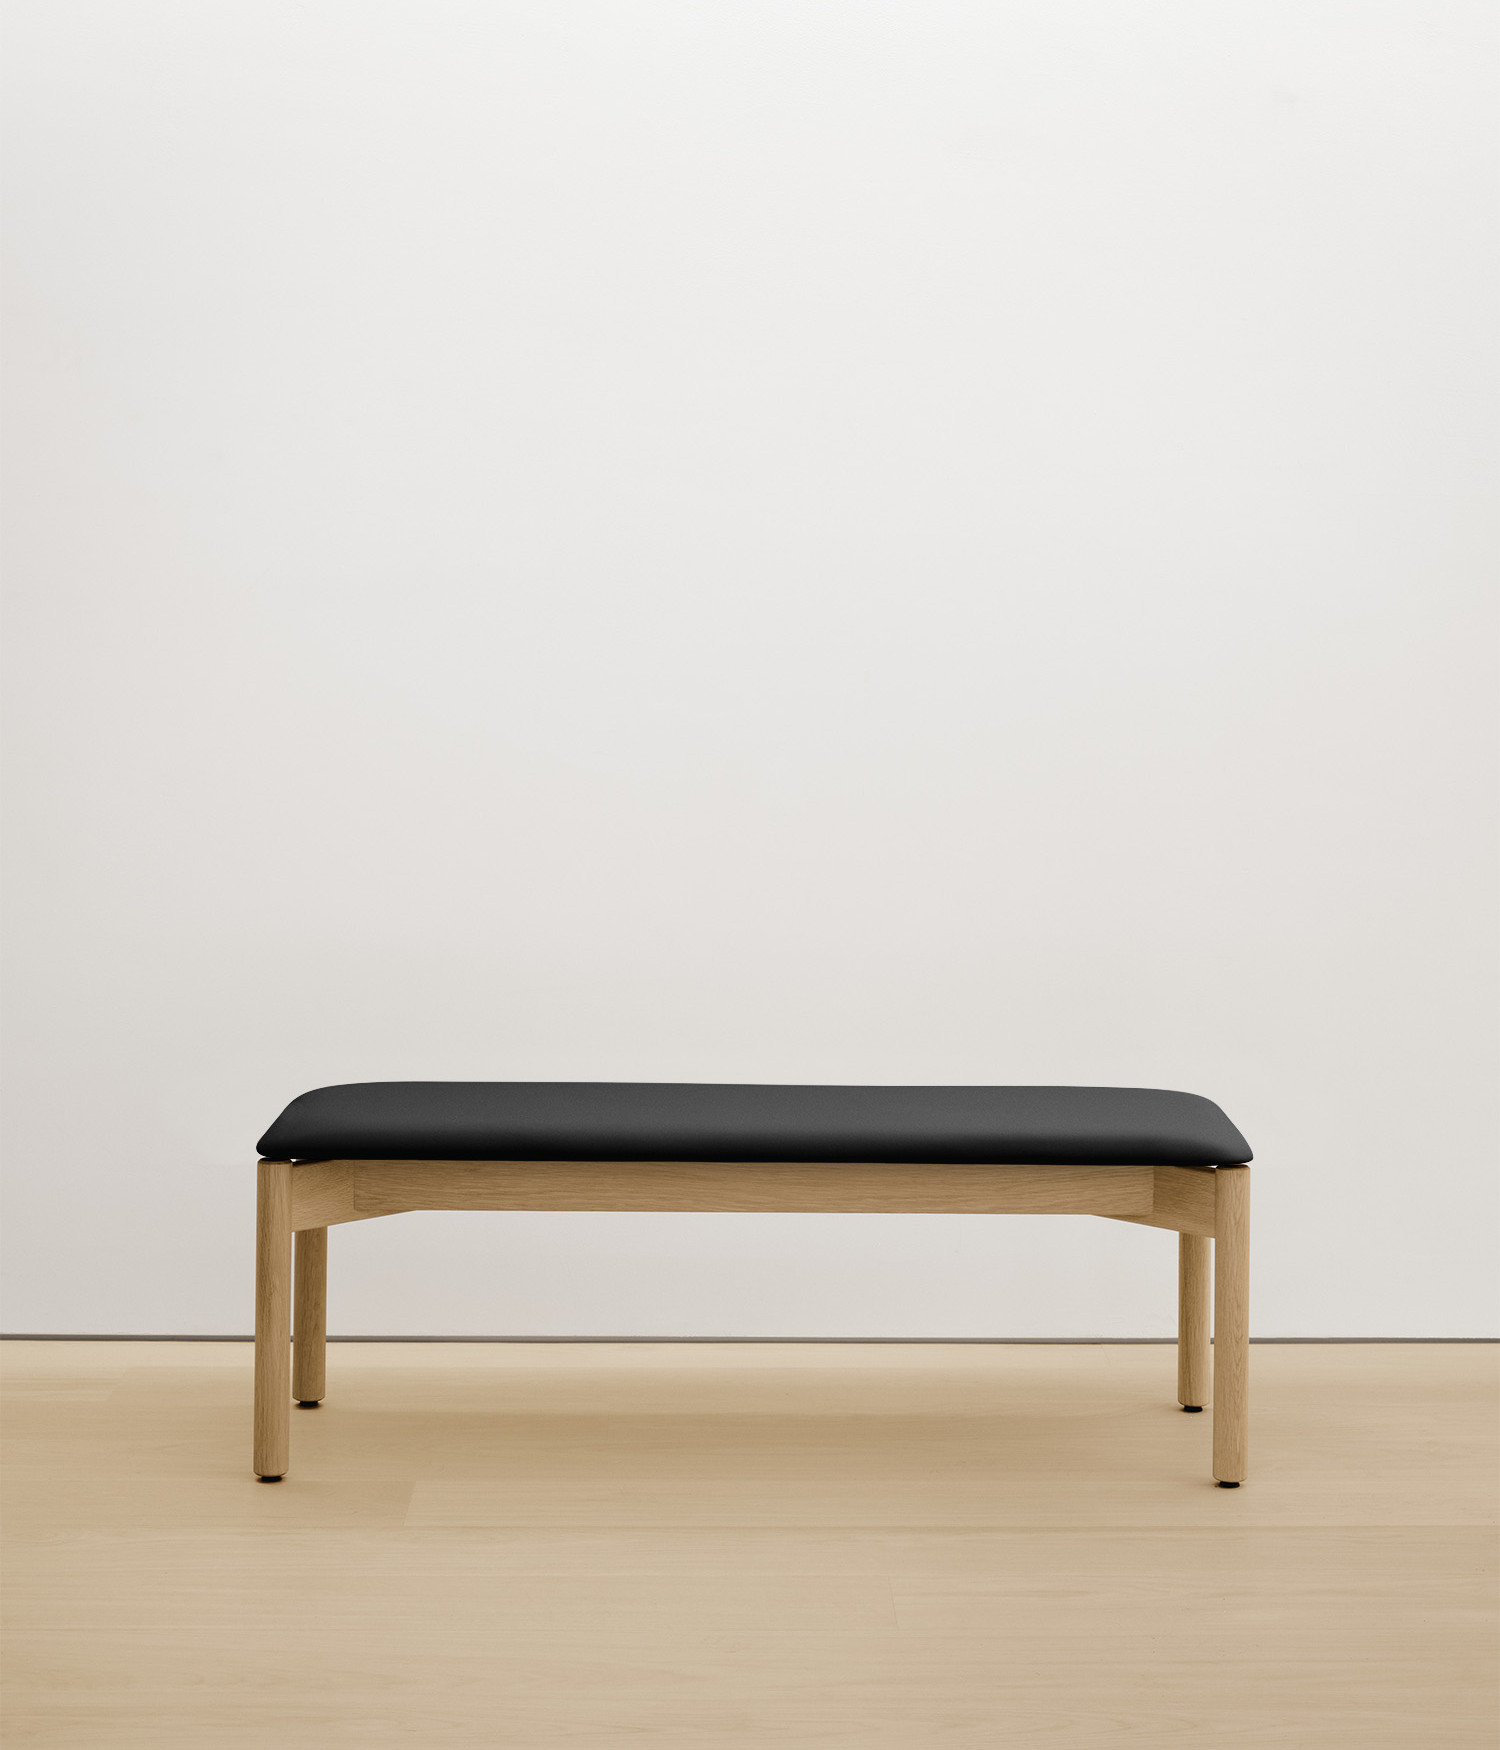 white-oak bench with black upholstered seat